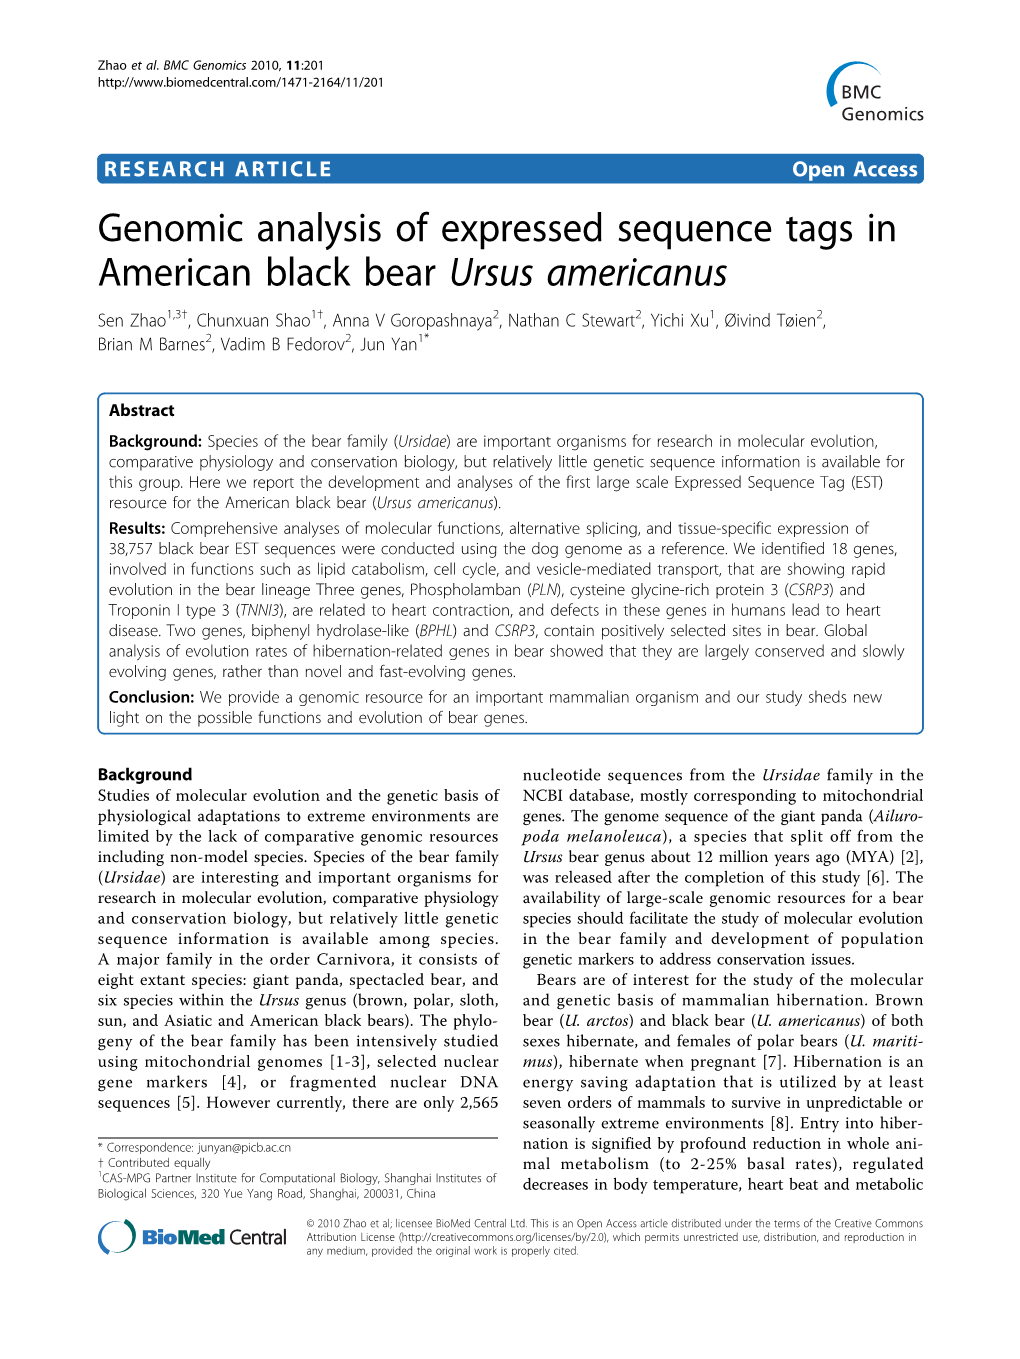 Genomic Analysis of Expressed Sequence Tags in American Black